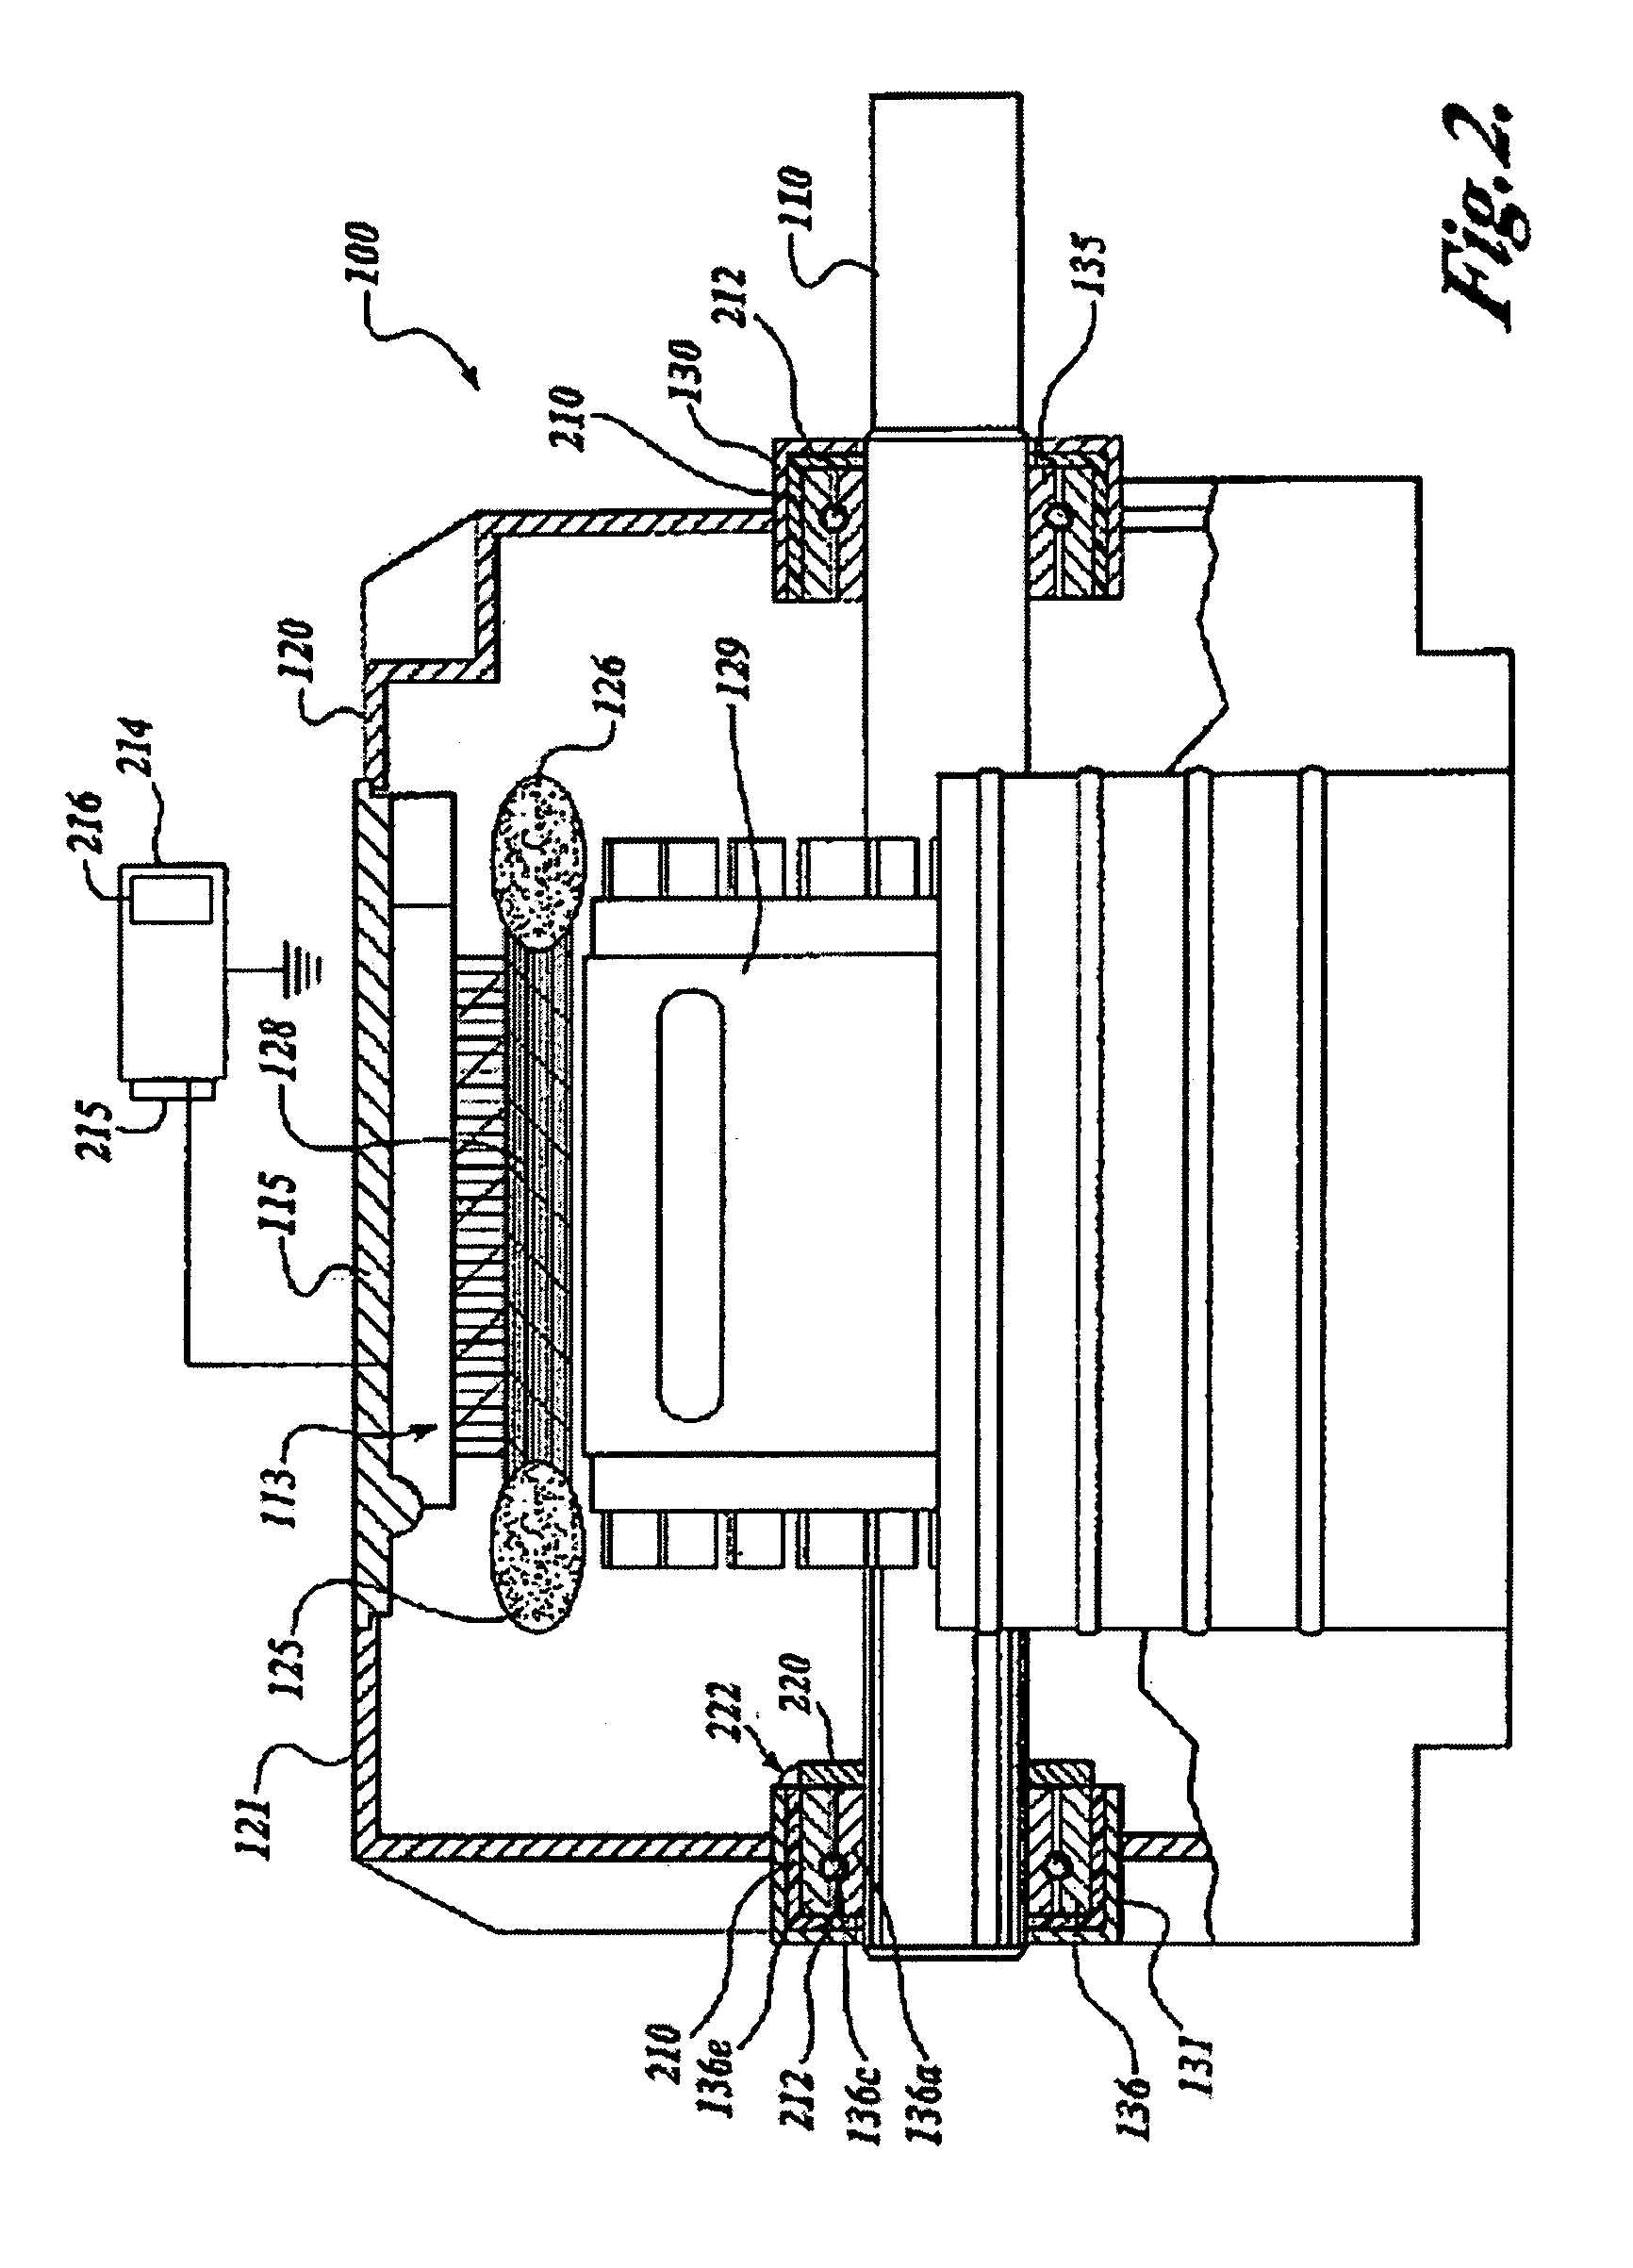 Method and system for reducing bearing fluting in electromechanical machine